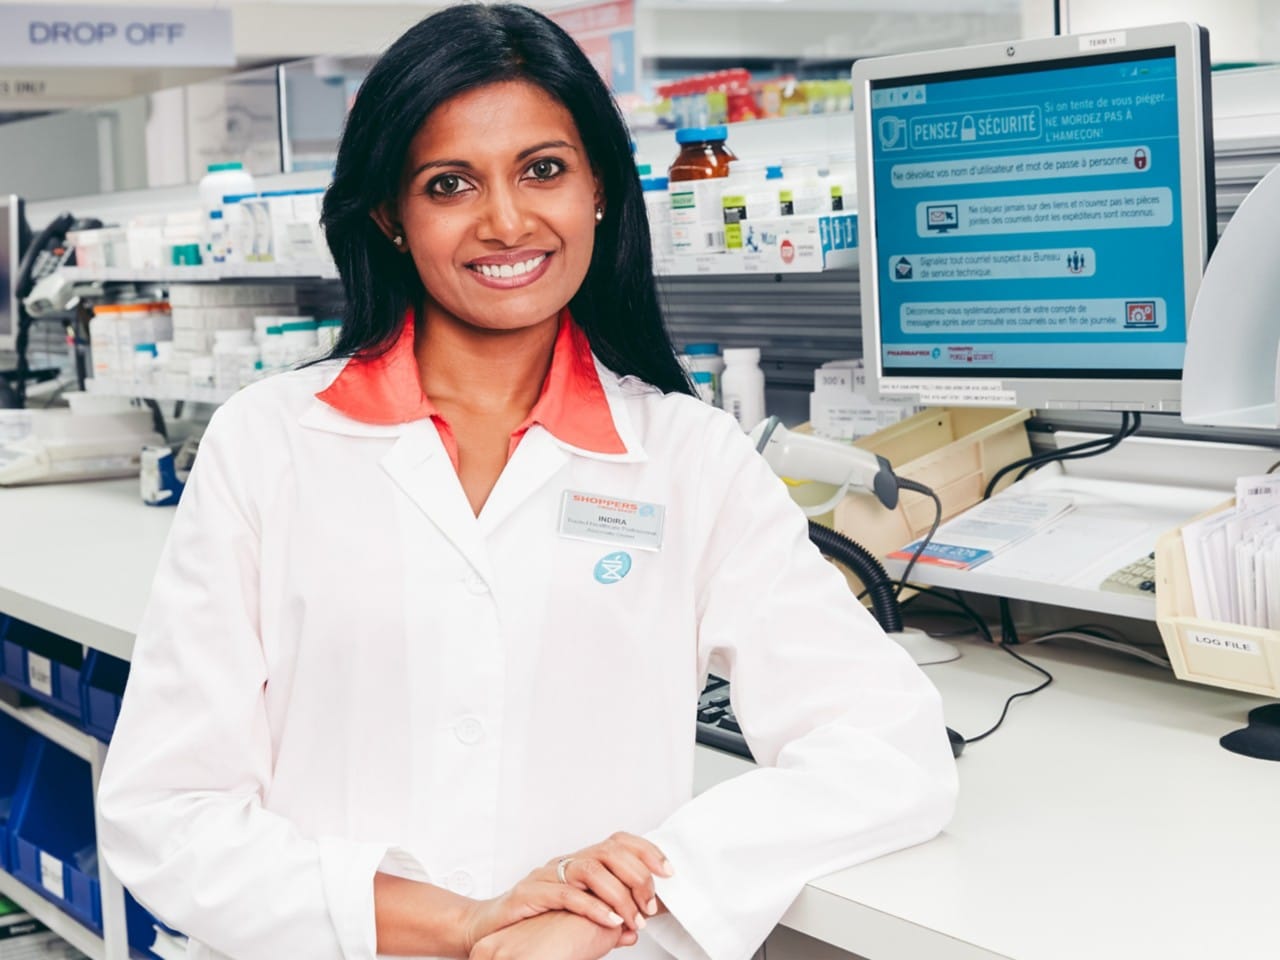 Pharmacist in white lab coat in front of a computer screen smiling.